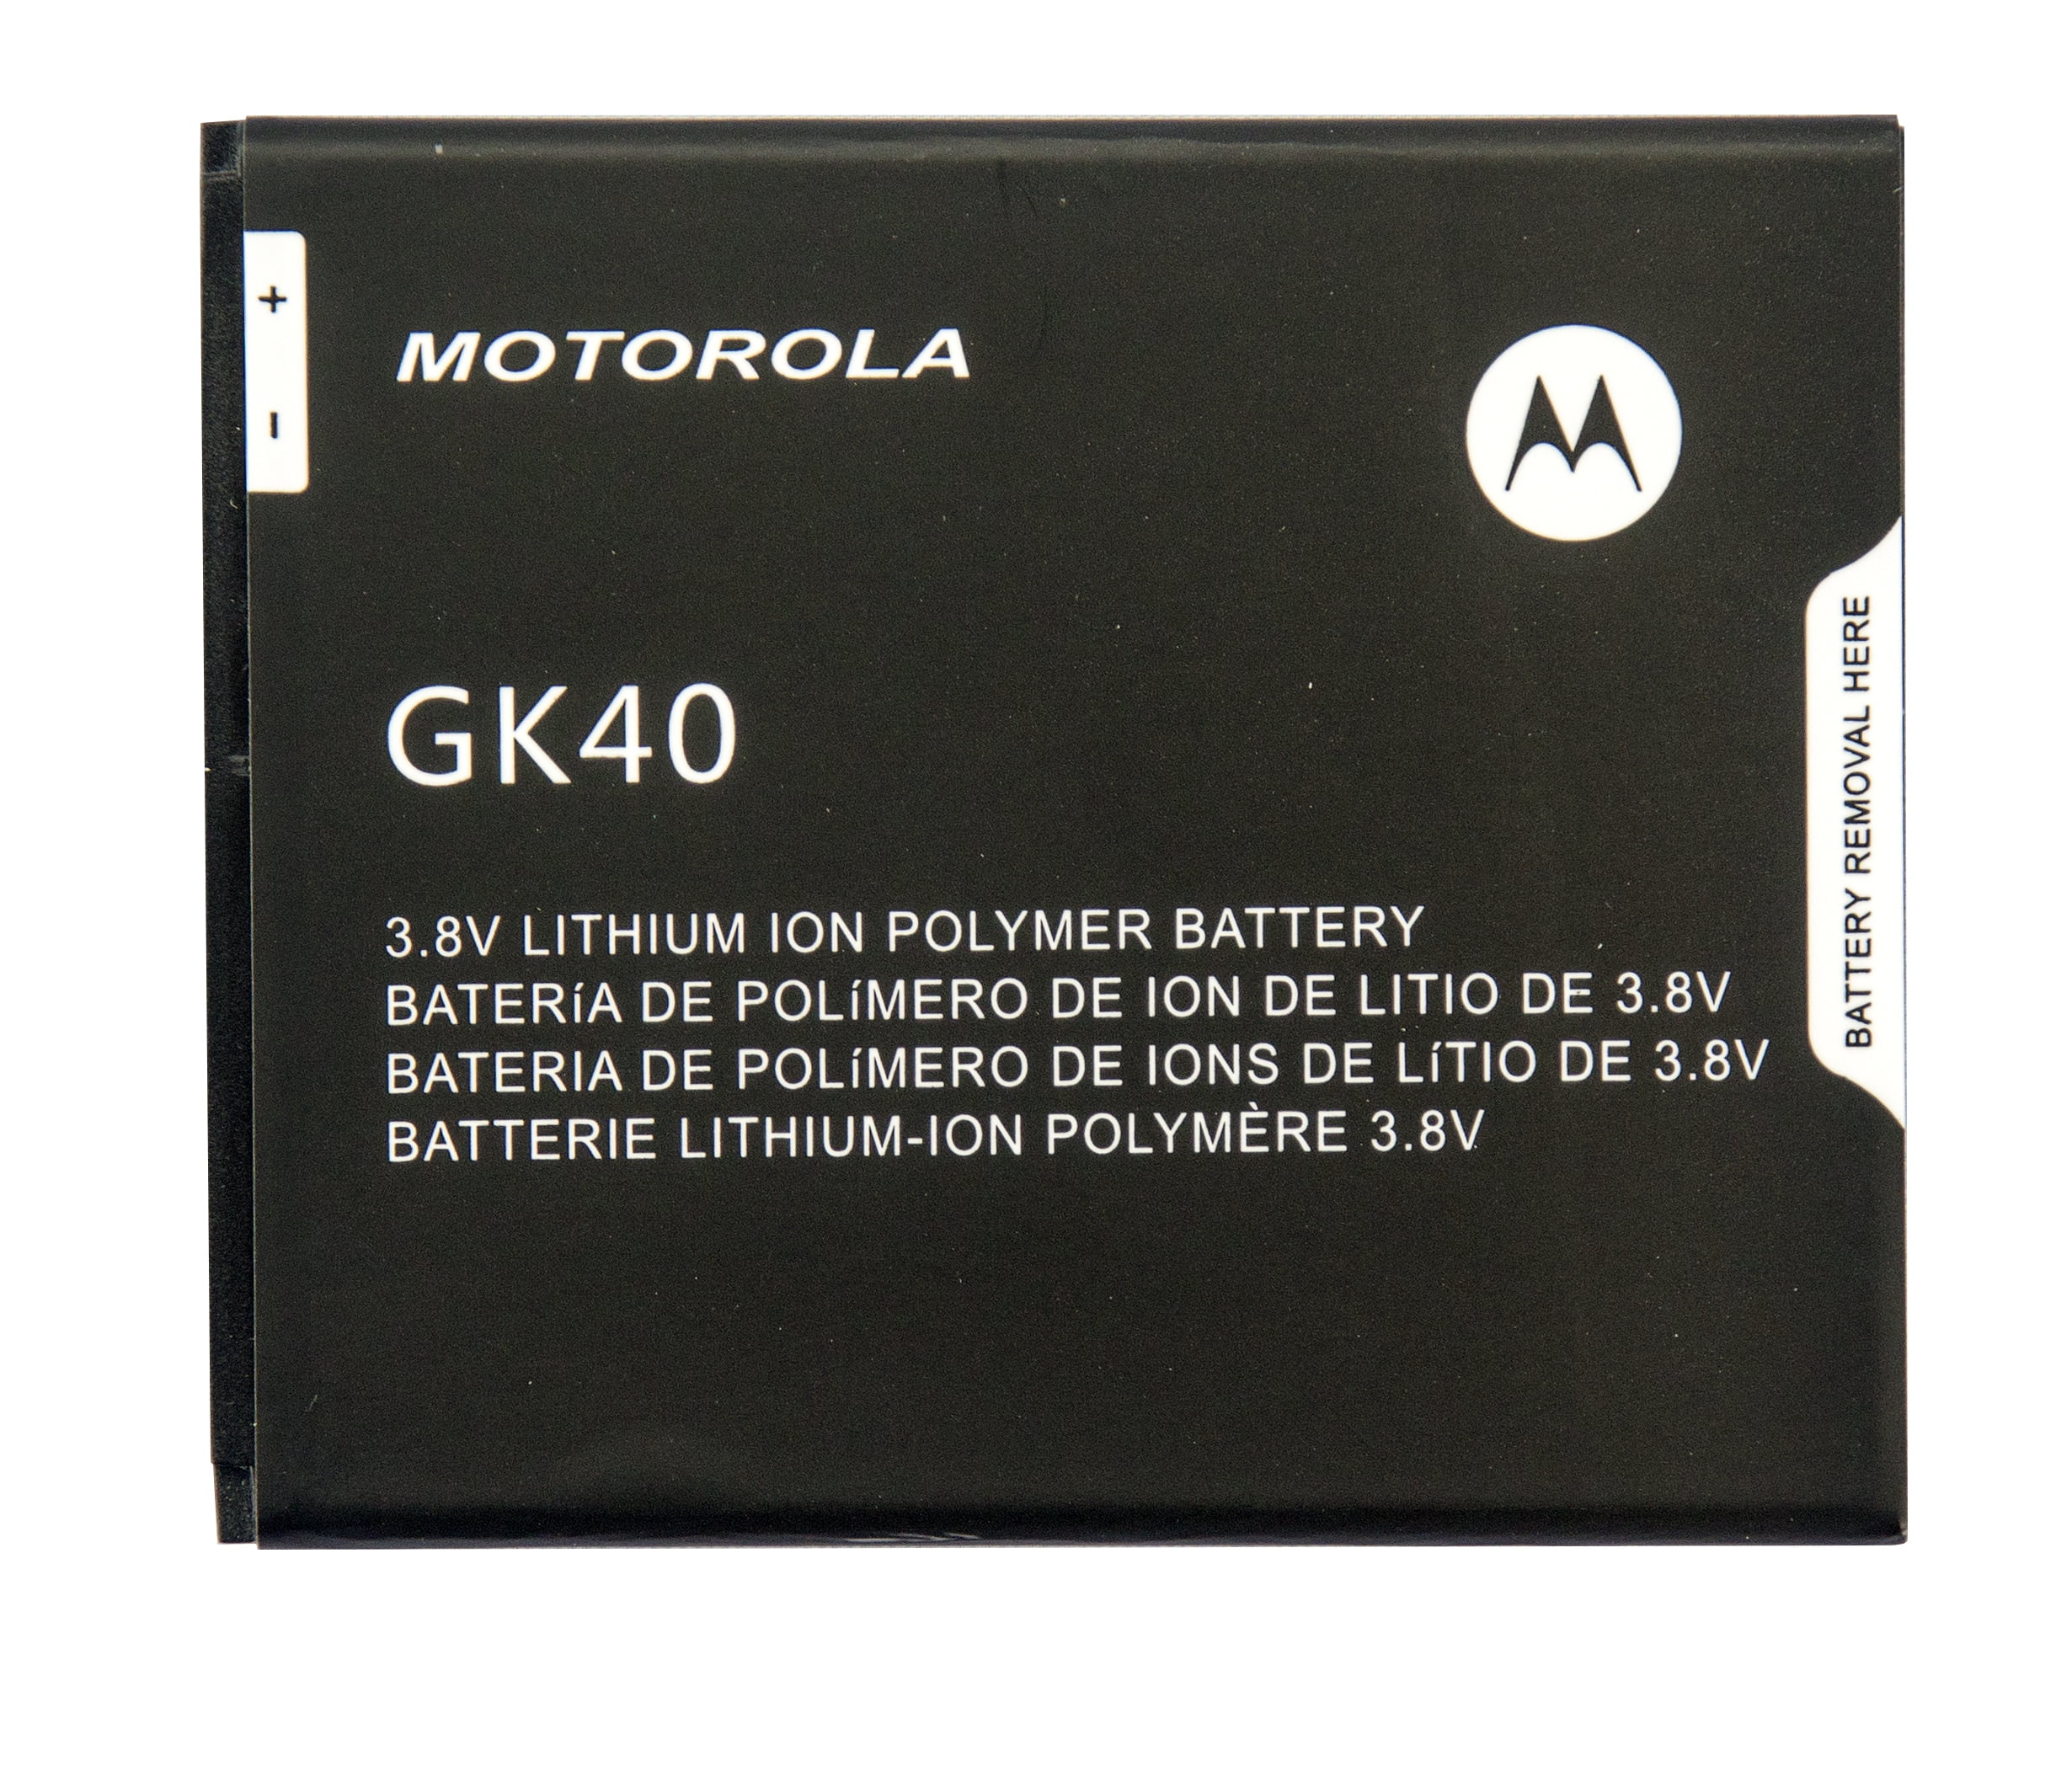  ASDAWN GK40 Battery Replacement for Motorola, Moto G4 Play  Battery SNN5976A for Motorola E3, E4, G4 Play, G5, XT1601, XT1603, XT1607  XT1609, XT1675, XT1700, XT1765, XT1766, XT1767PP : Cell Phones 